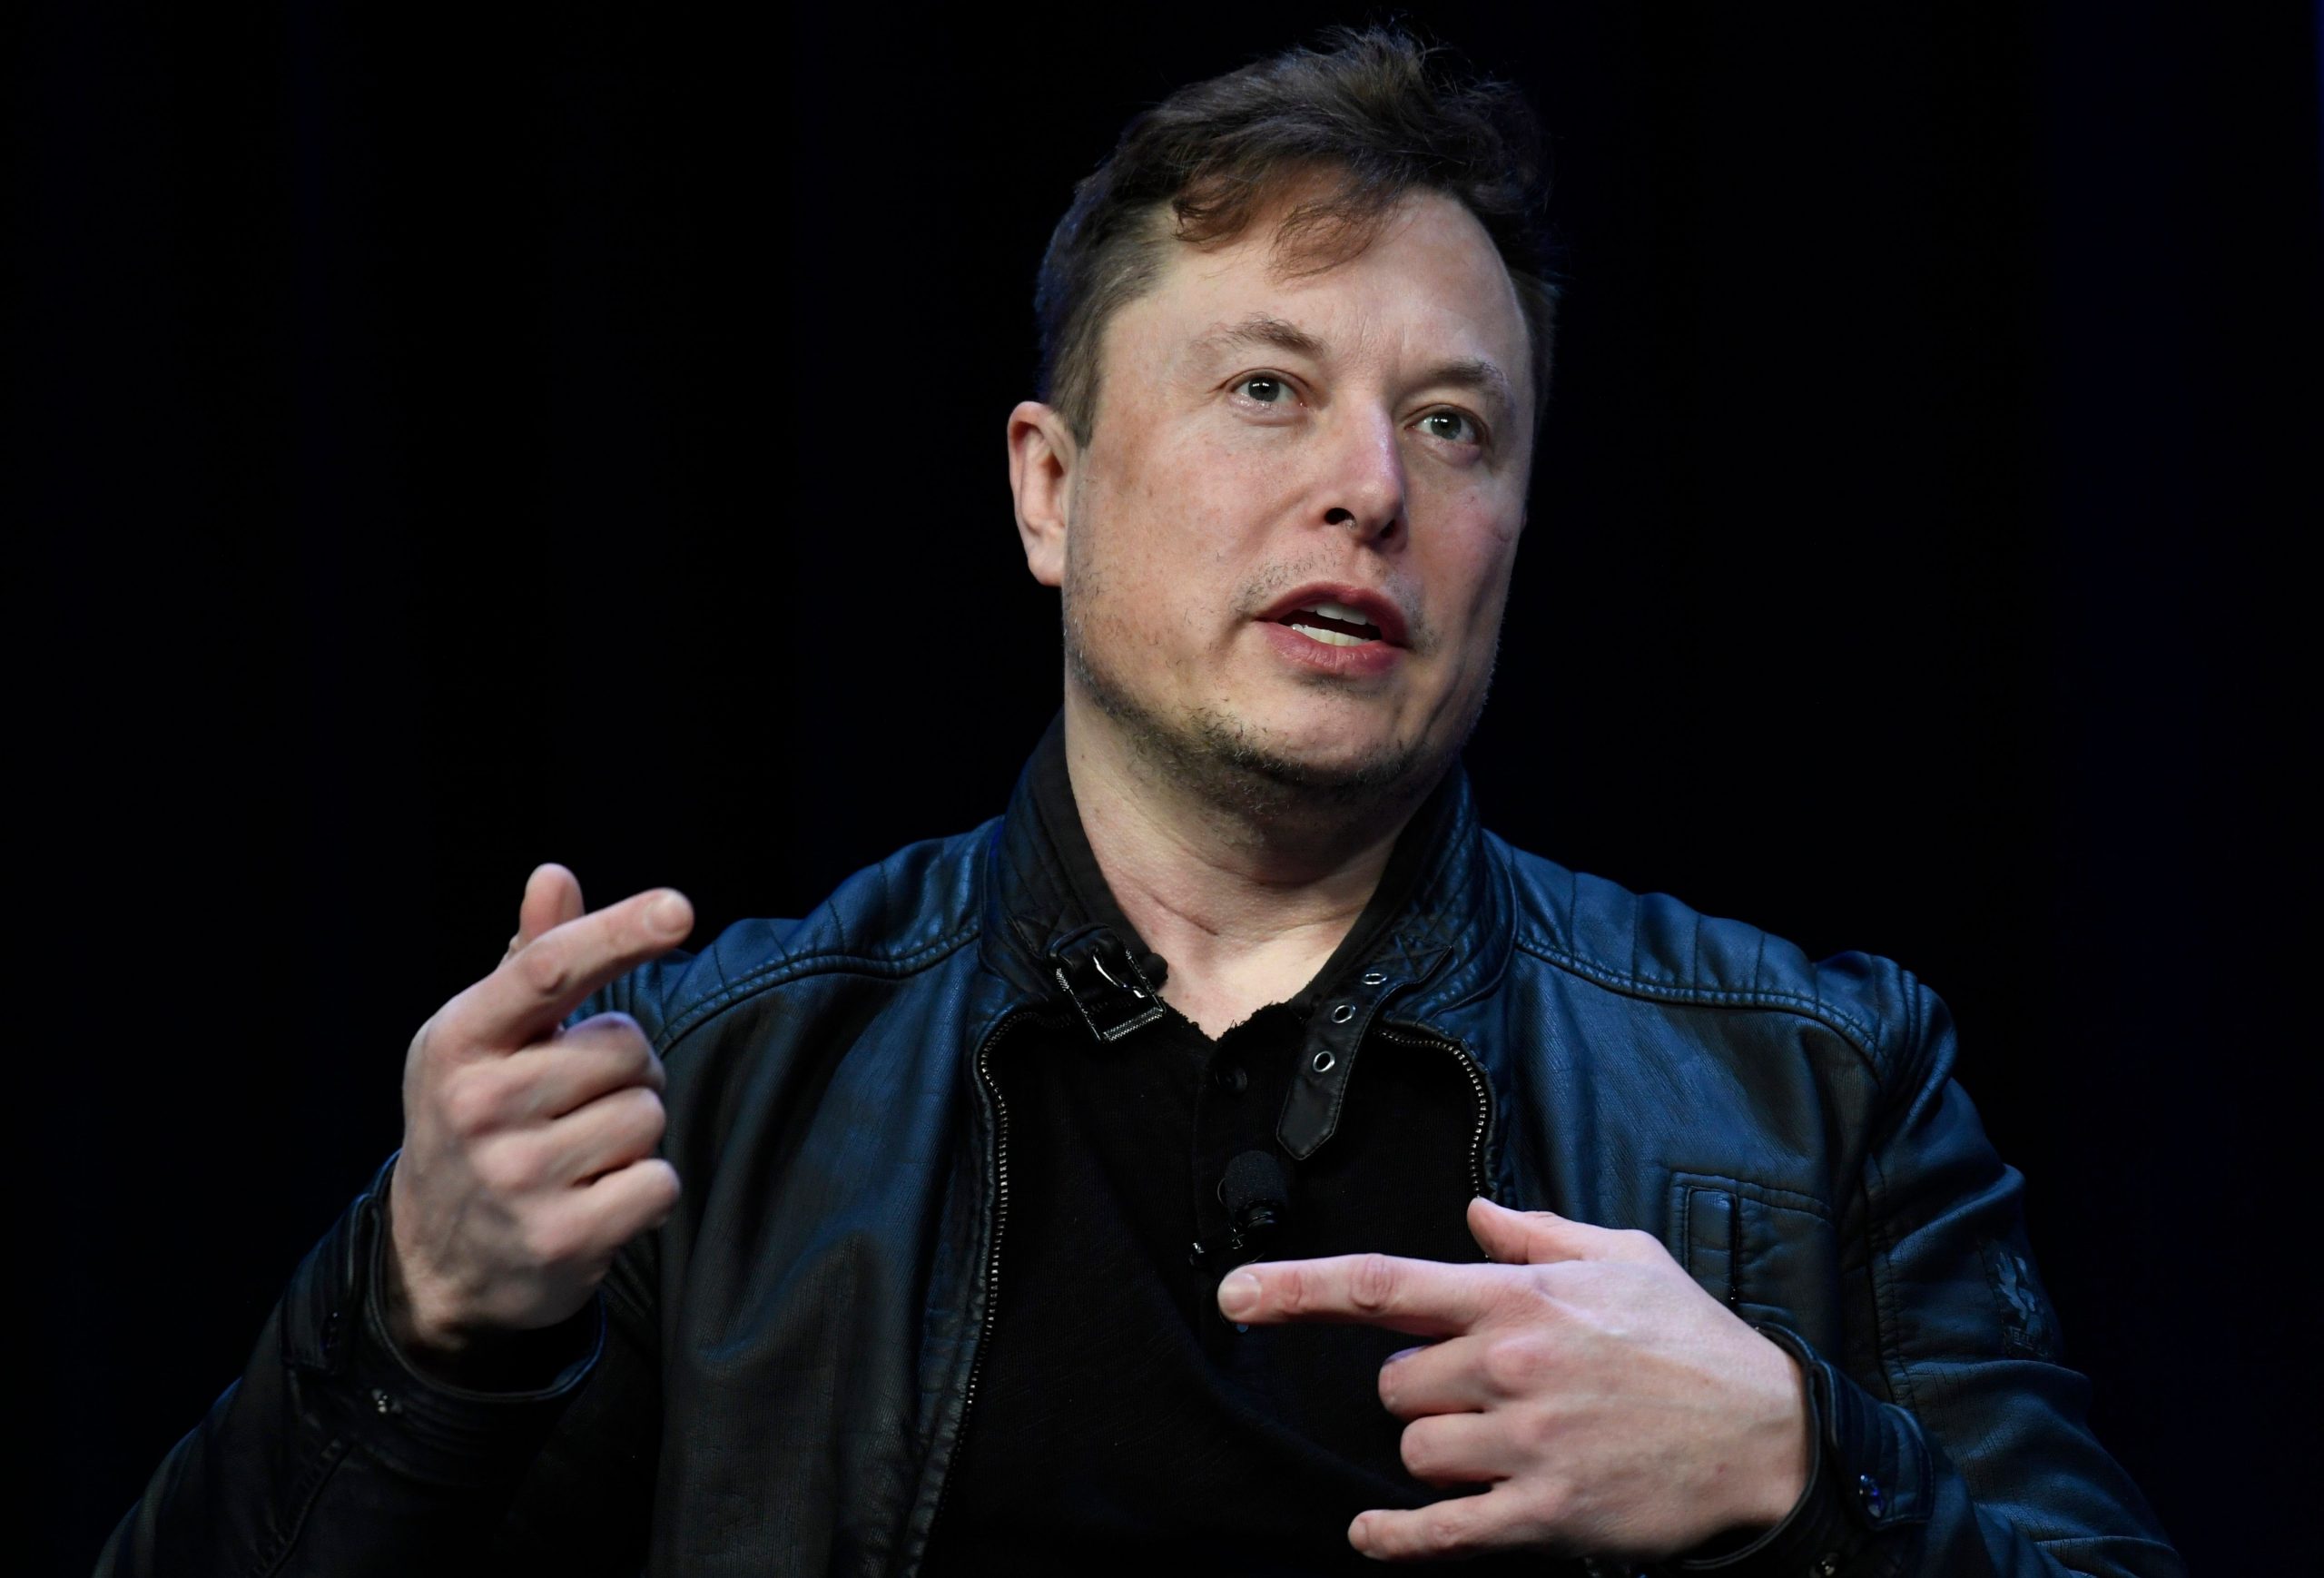 Elon Musk says Twitter is yet to make changes in its content moderation policies